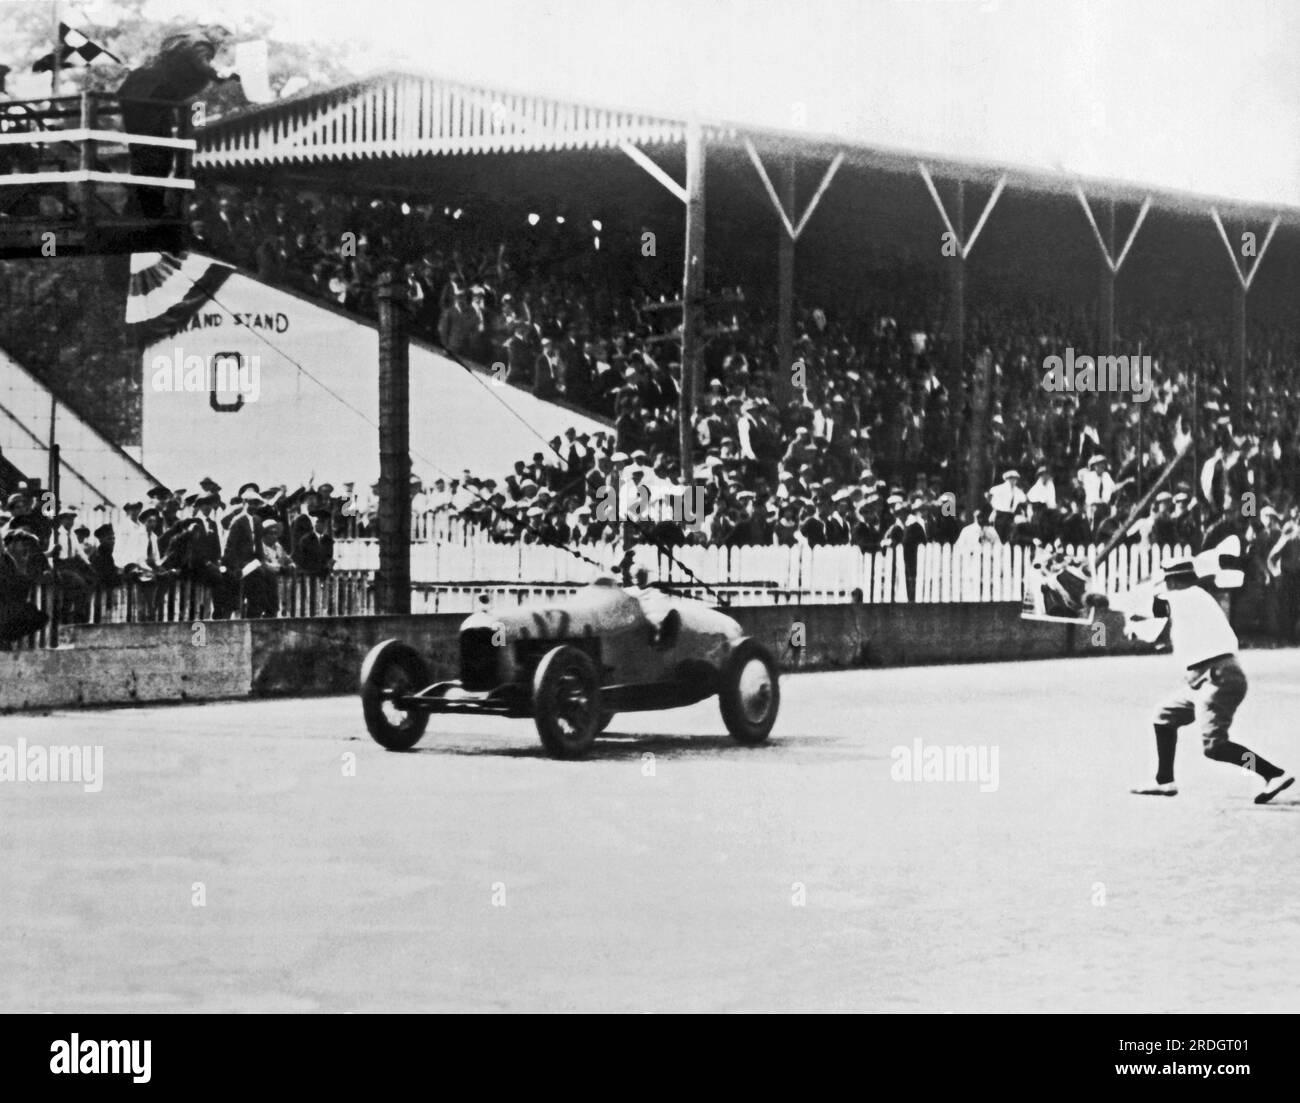 Indianapolis, Indiana:  June 1, 1925 Peter De Paolo was the victor in the indy 500 race this year with a record speed of 101.13 mph. He is the nephew of racecar driving champion Ralph De Palma. Stock Photo